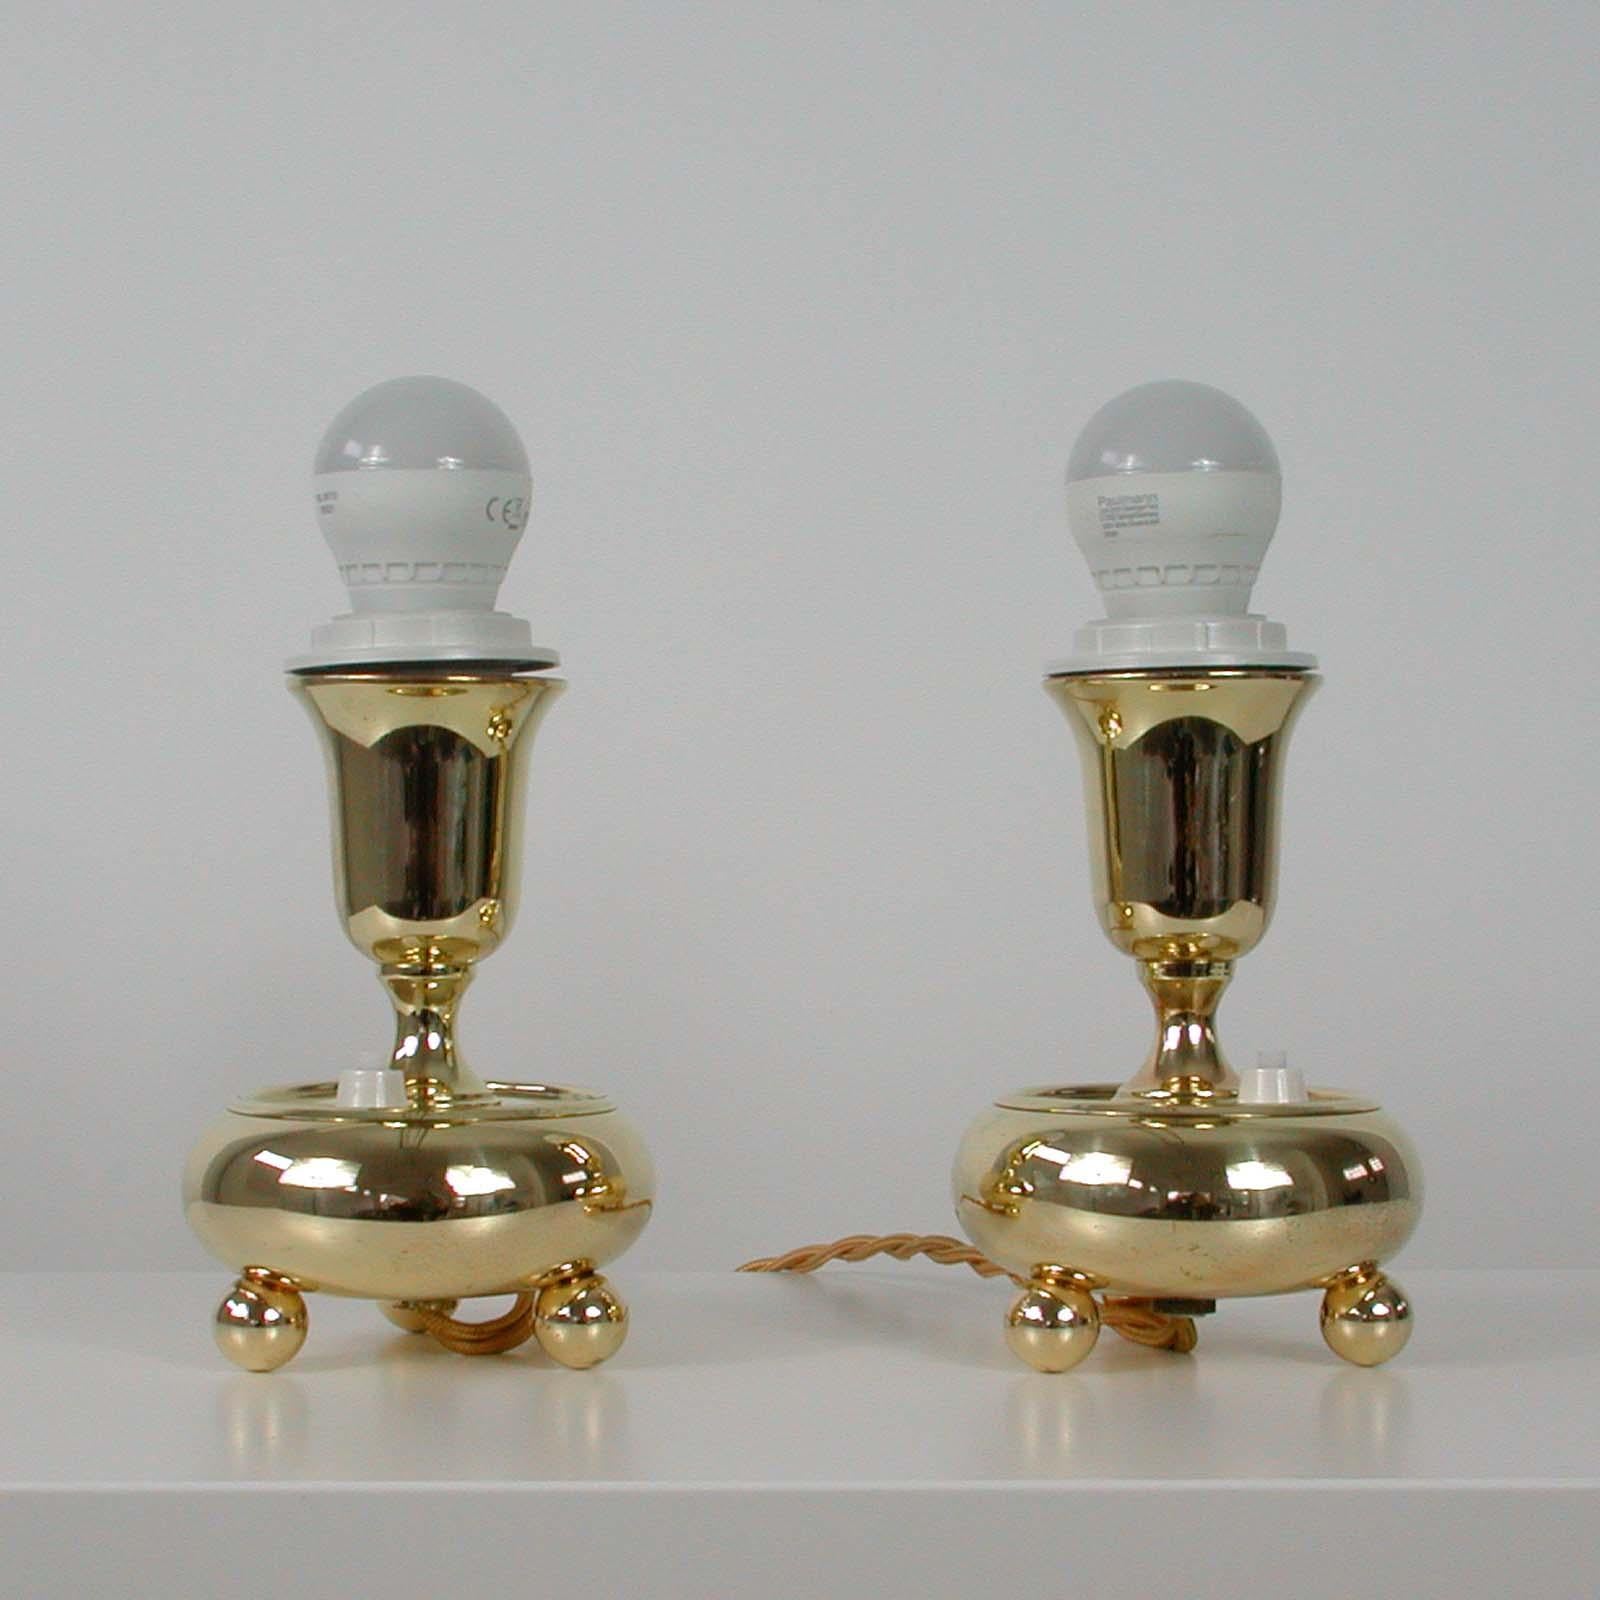 German Bauhaus Brass and Opal Torchiere Table Lamps, Set of 2, 1930s For Sale 6